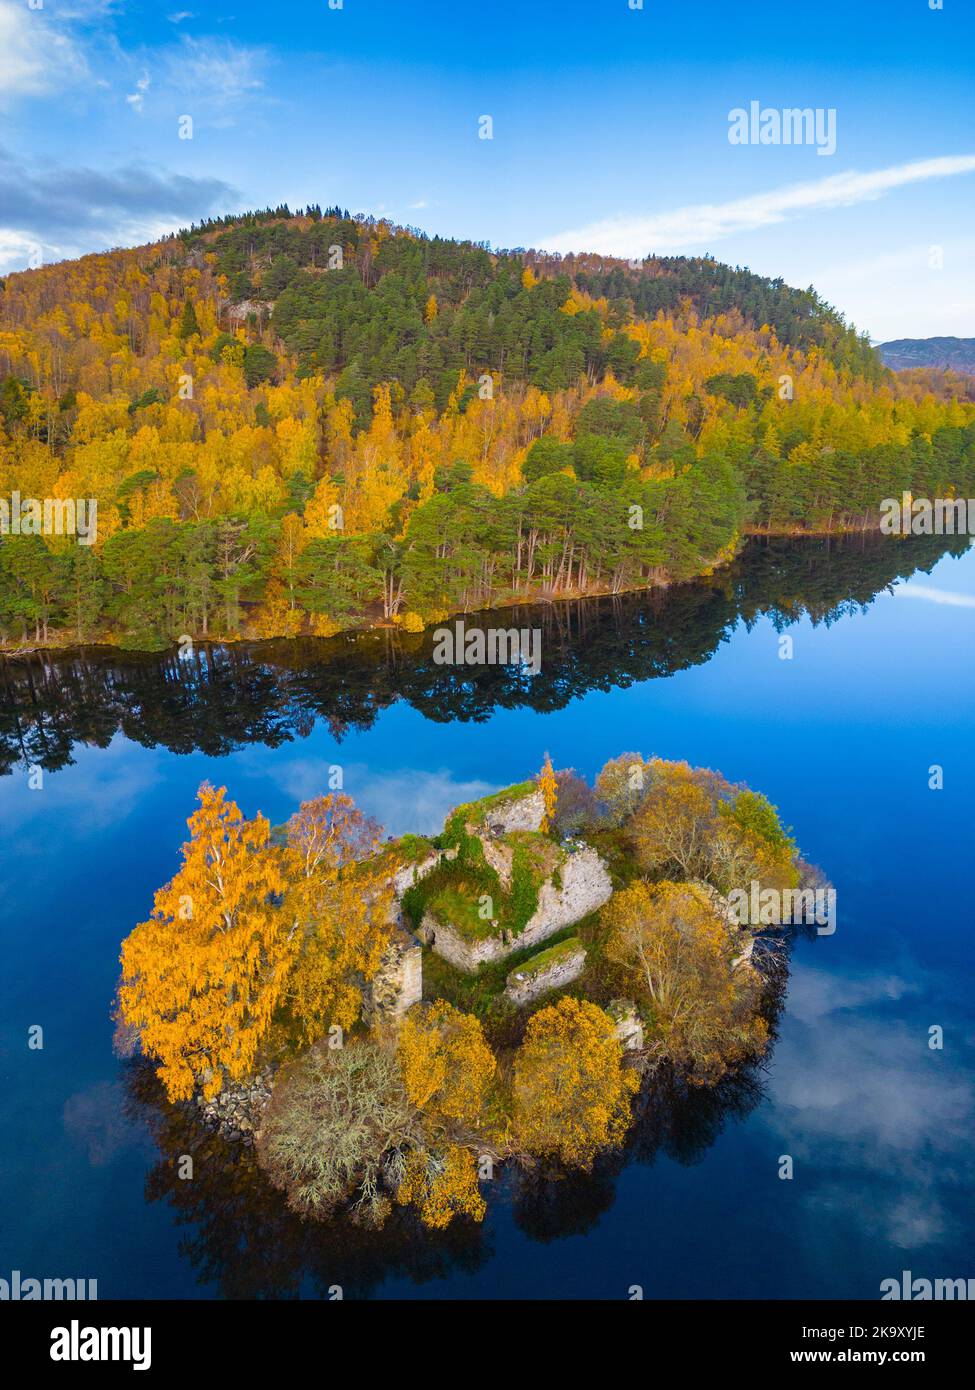 Aerial view of autumn colours at ruined castle on island on Loch an Eilein in Rothiemurchus estate, Cairngorms National Park near Aviemore Stock Photo